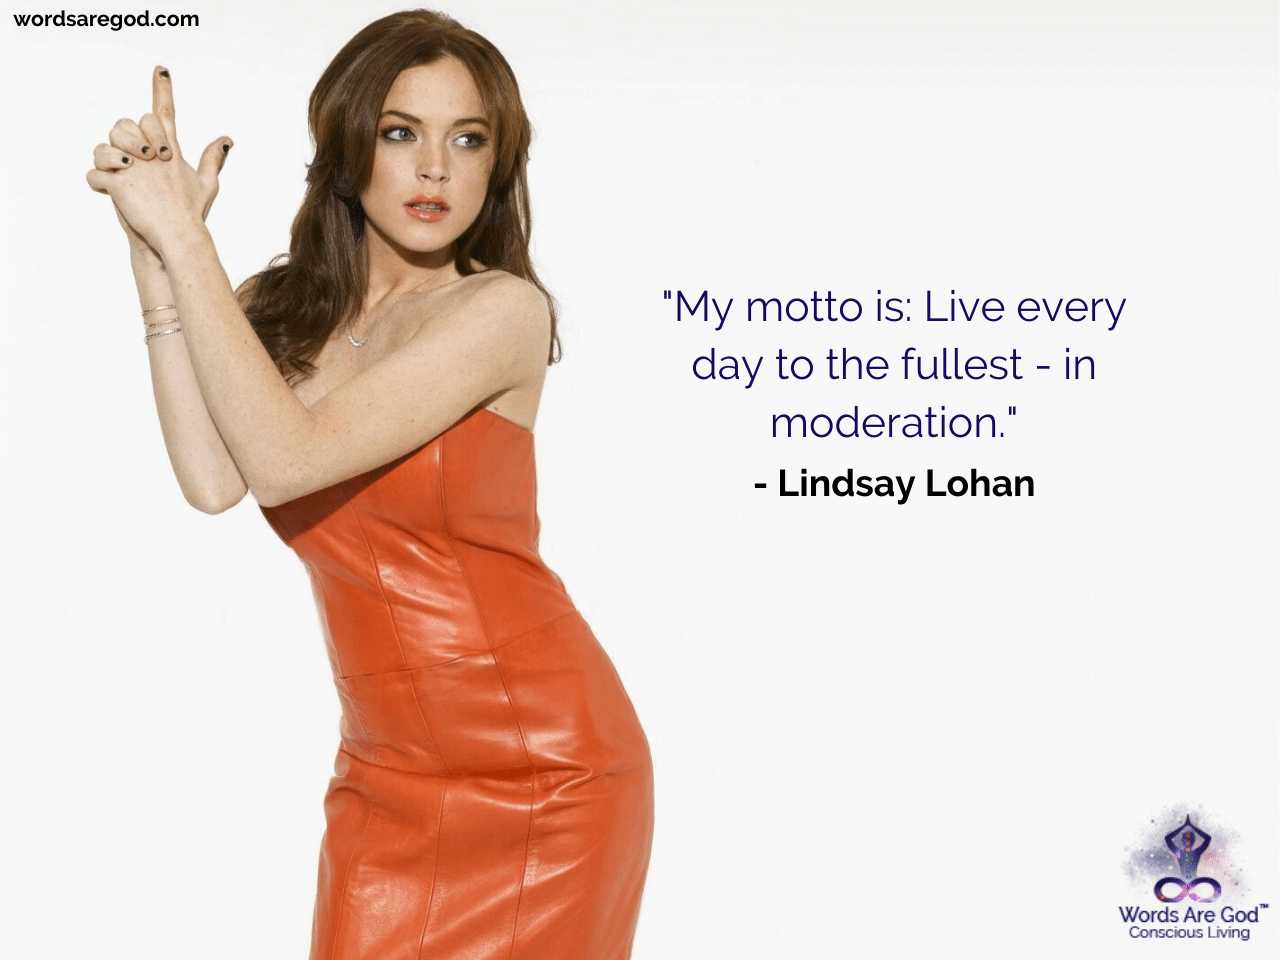 Lindsay Lohan Best Quotes by Lindsay Lohan